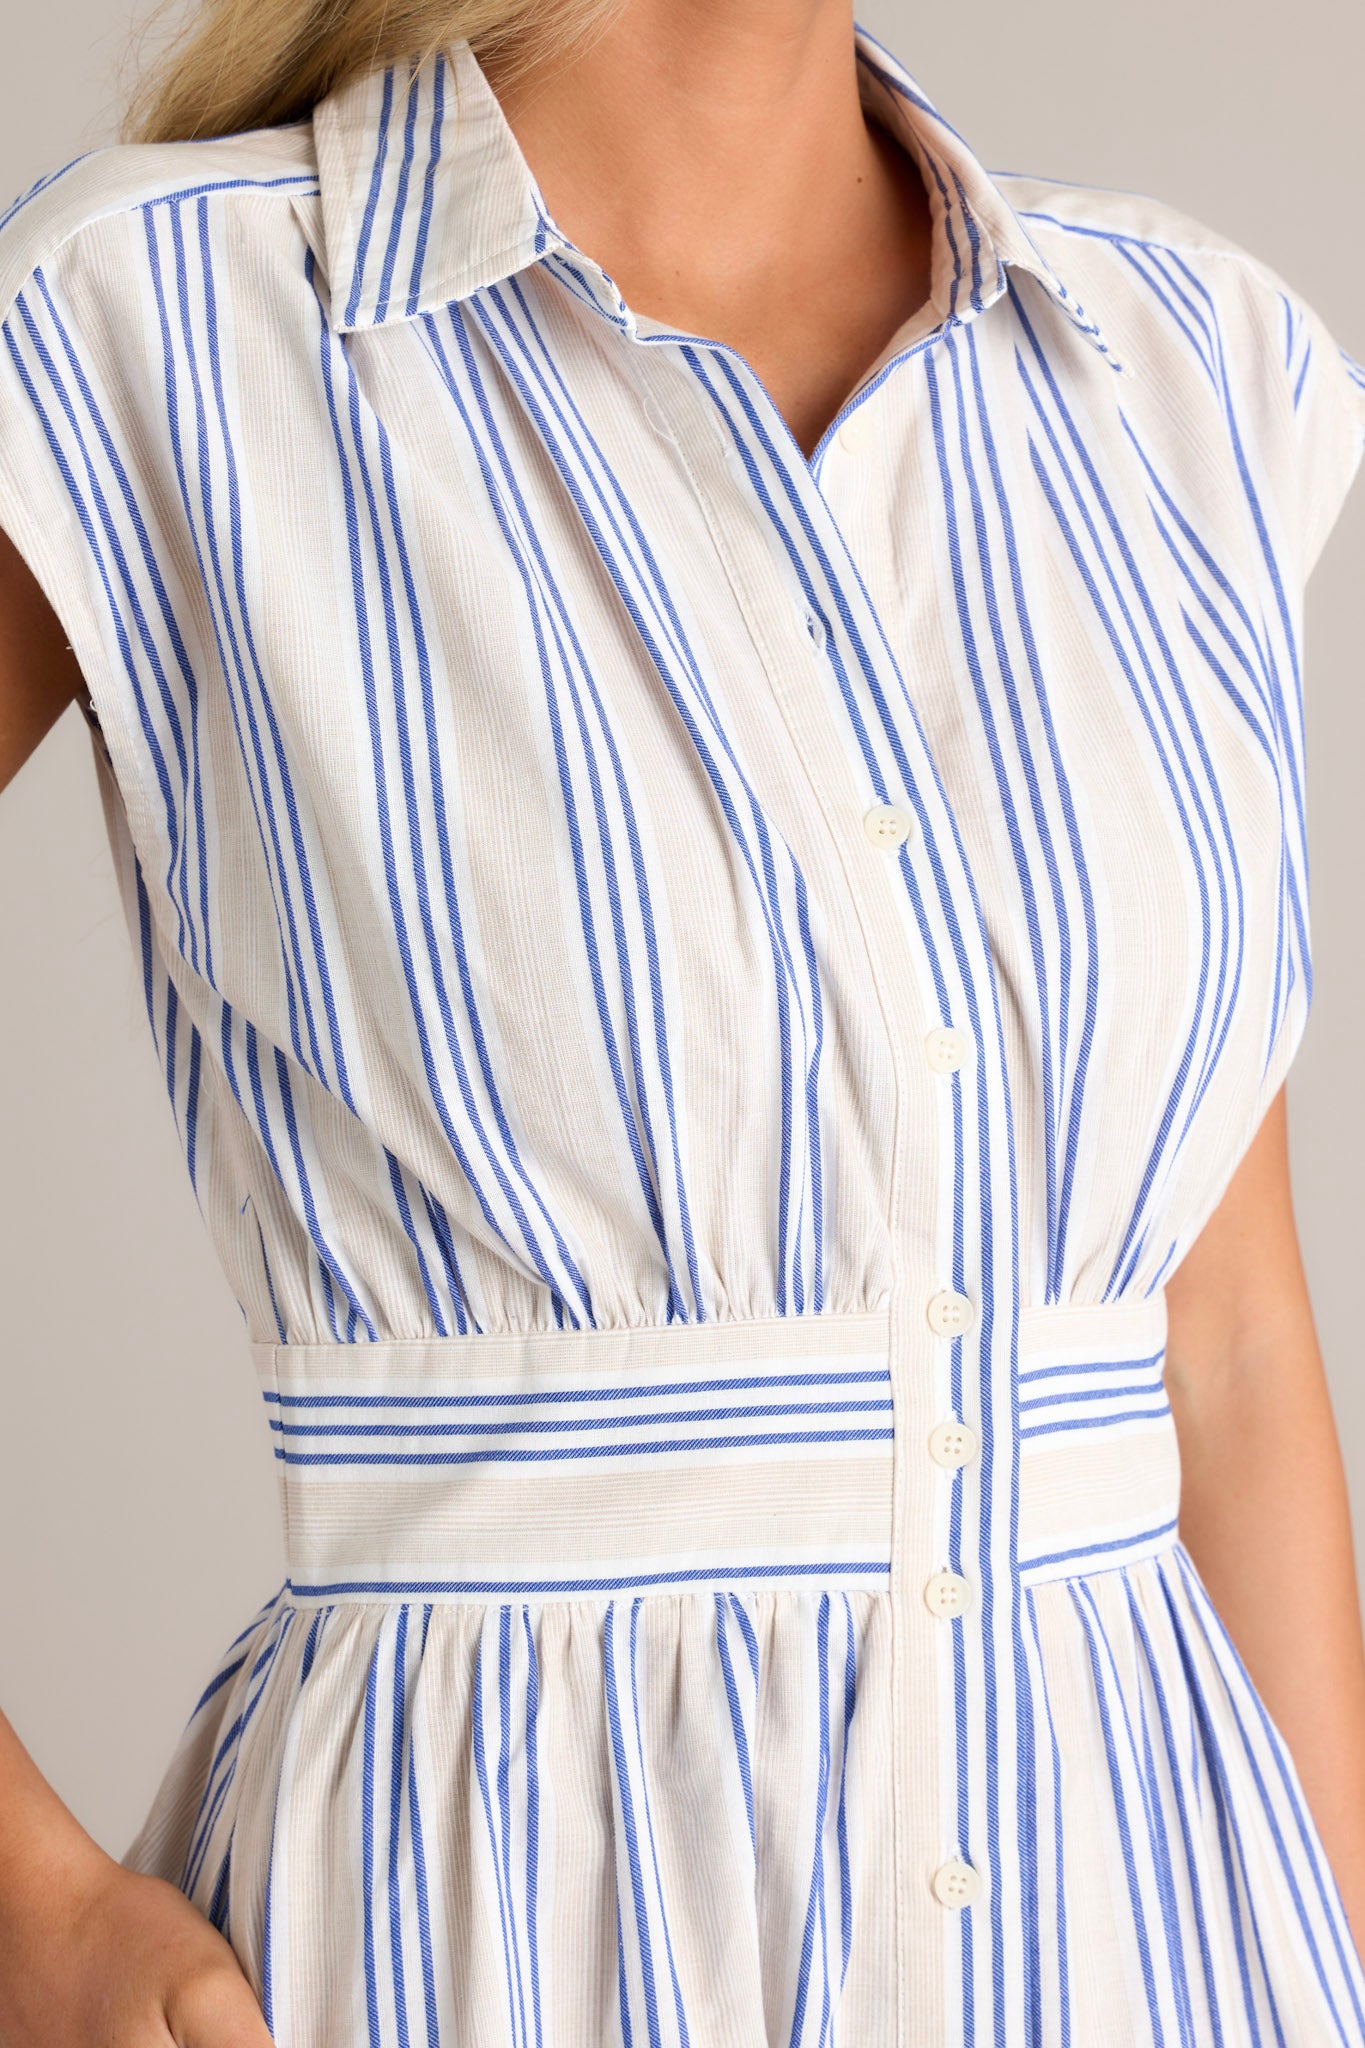 Close-up of the blue stripe midi dress showing the collared neckline, functional button front, and beige and blue stripe pattern.